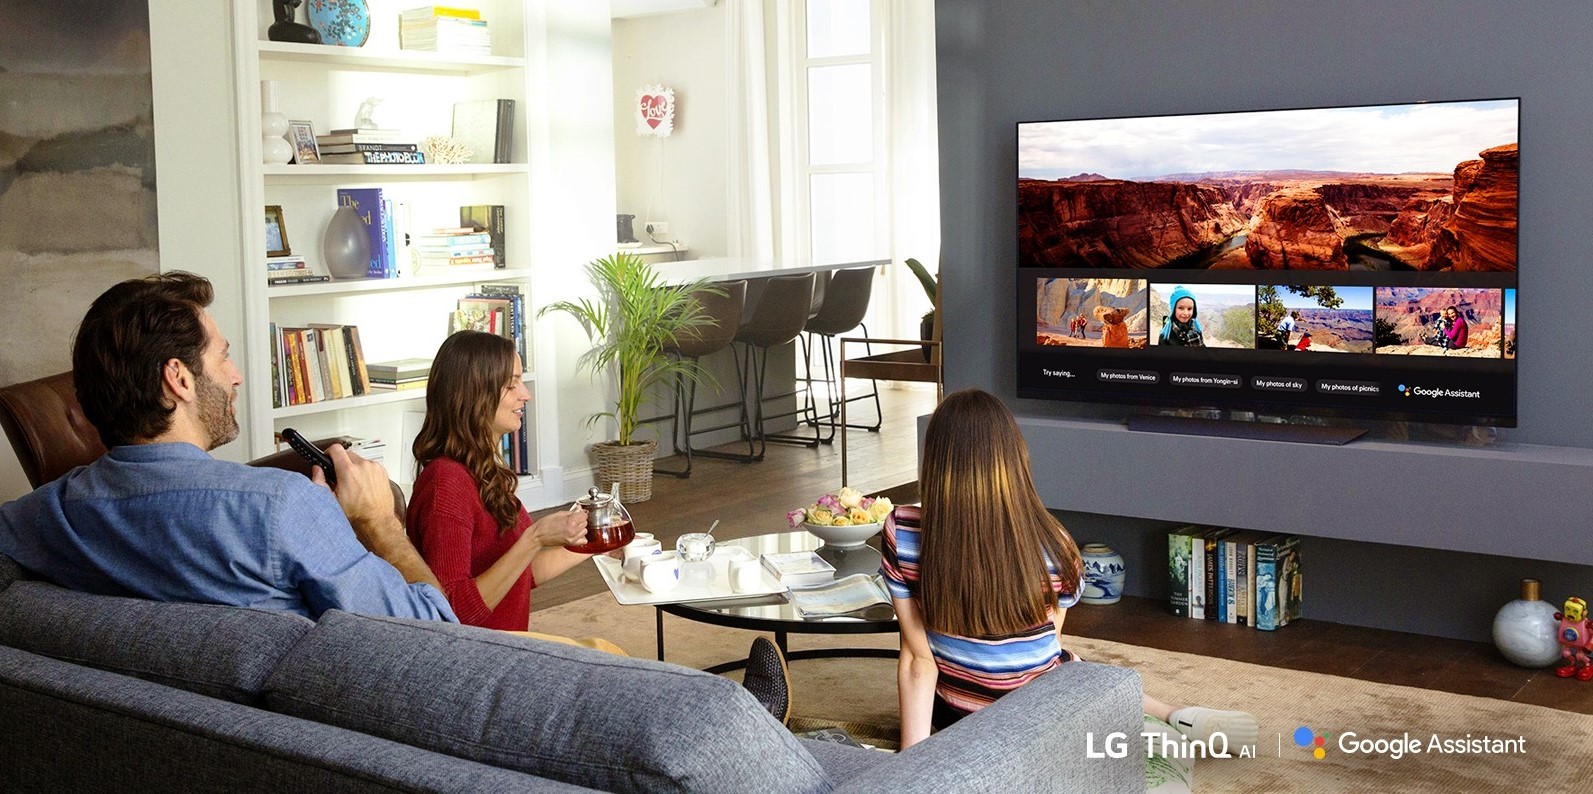 A family sits in the living room while looking at their travel photos via Google Assistant on LG’s ThinQ TV.